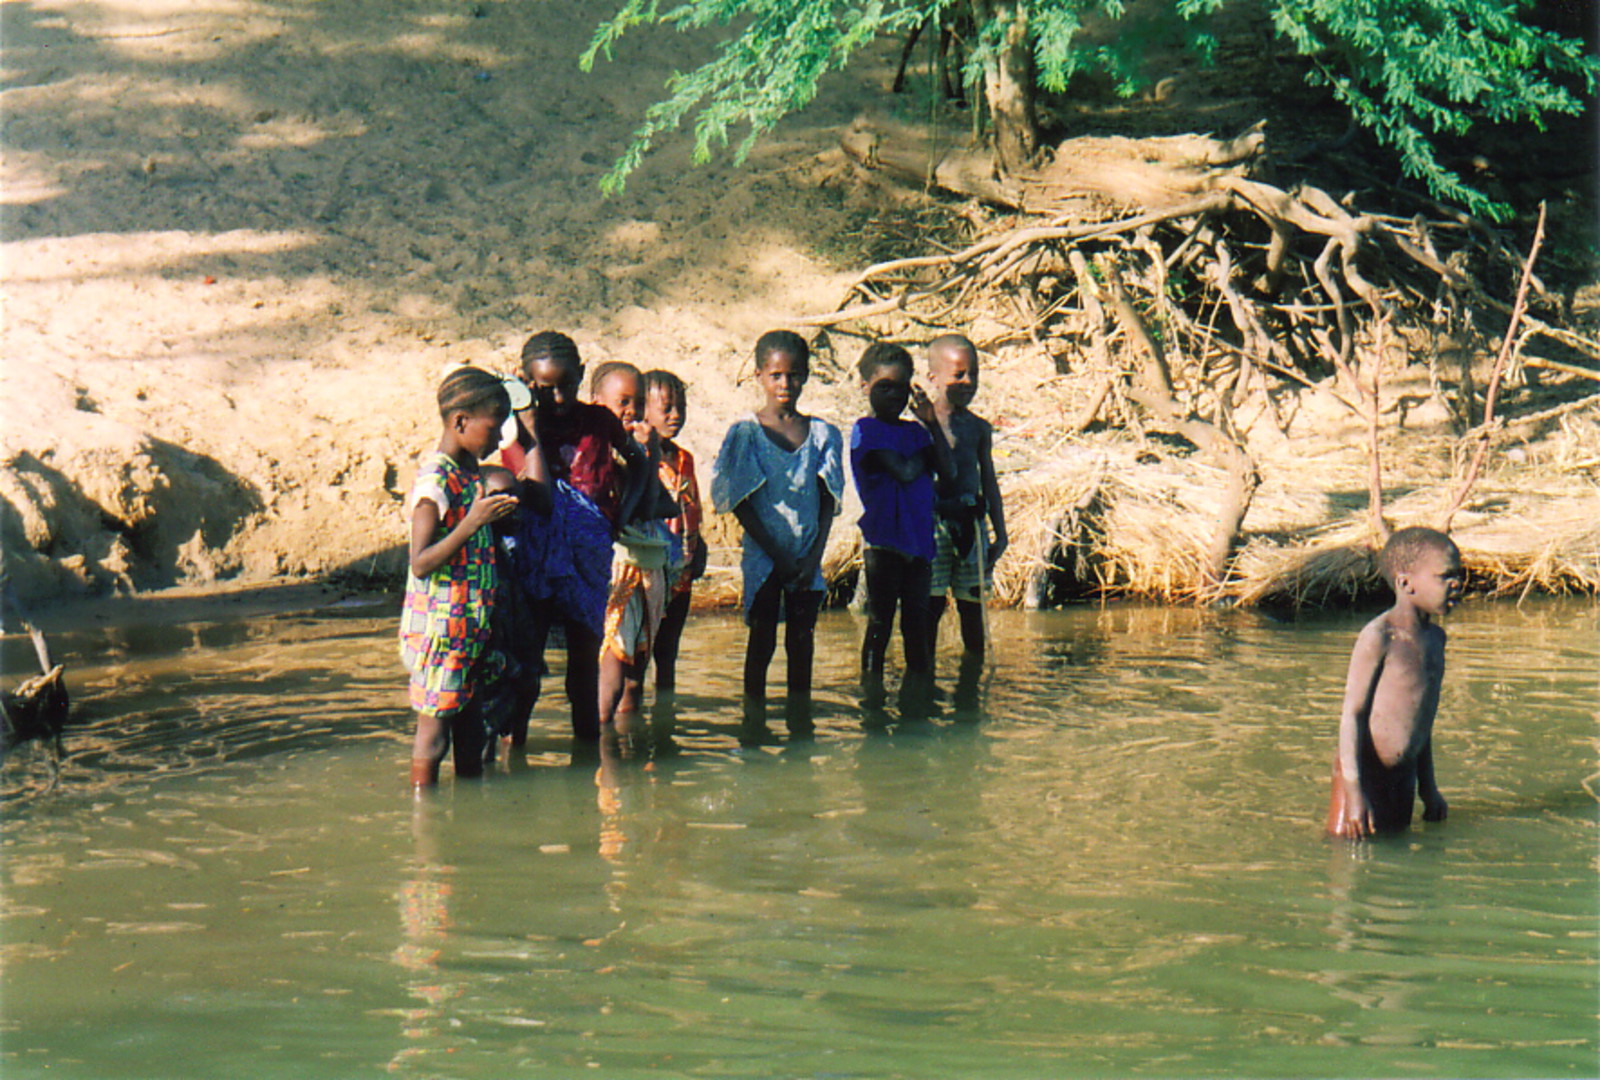 Children standing in the River Niger